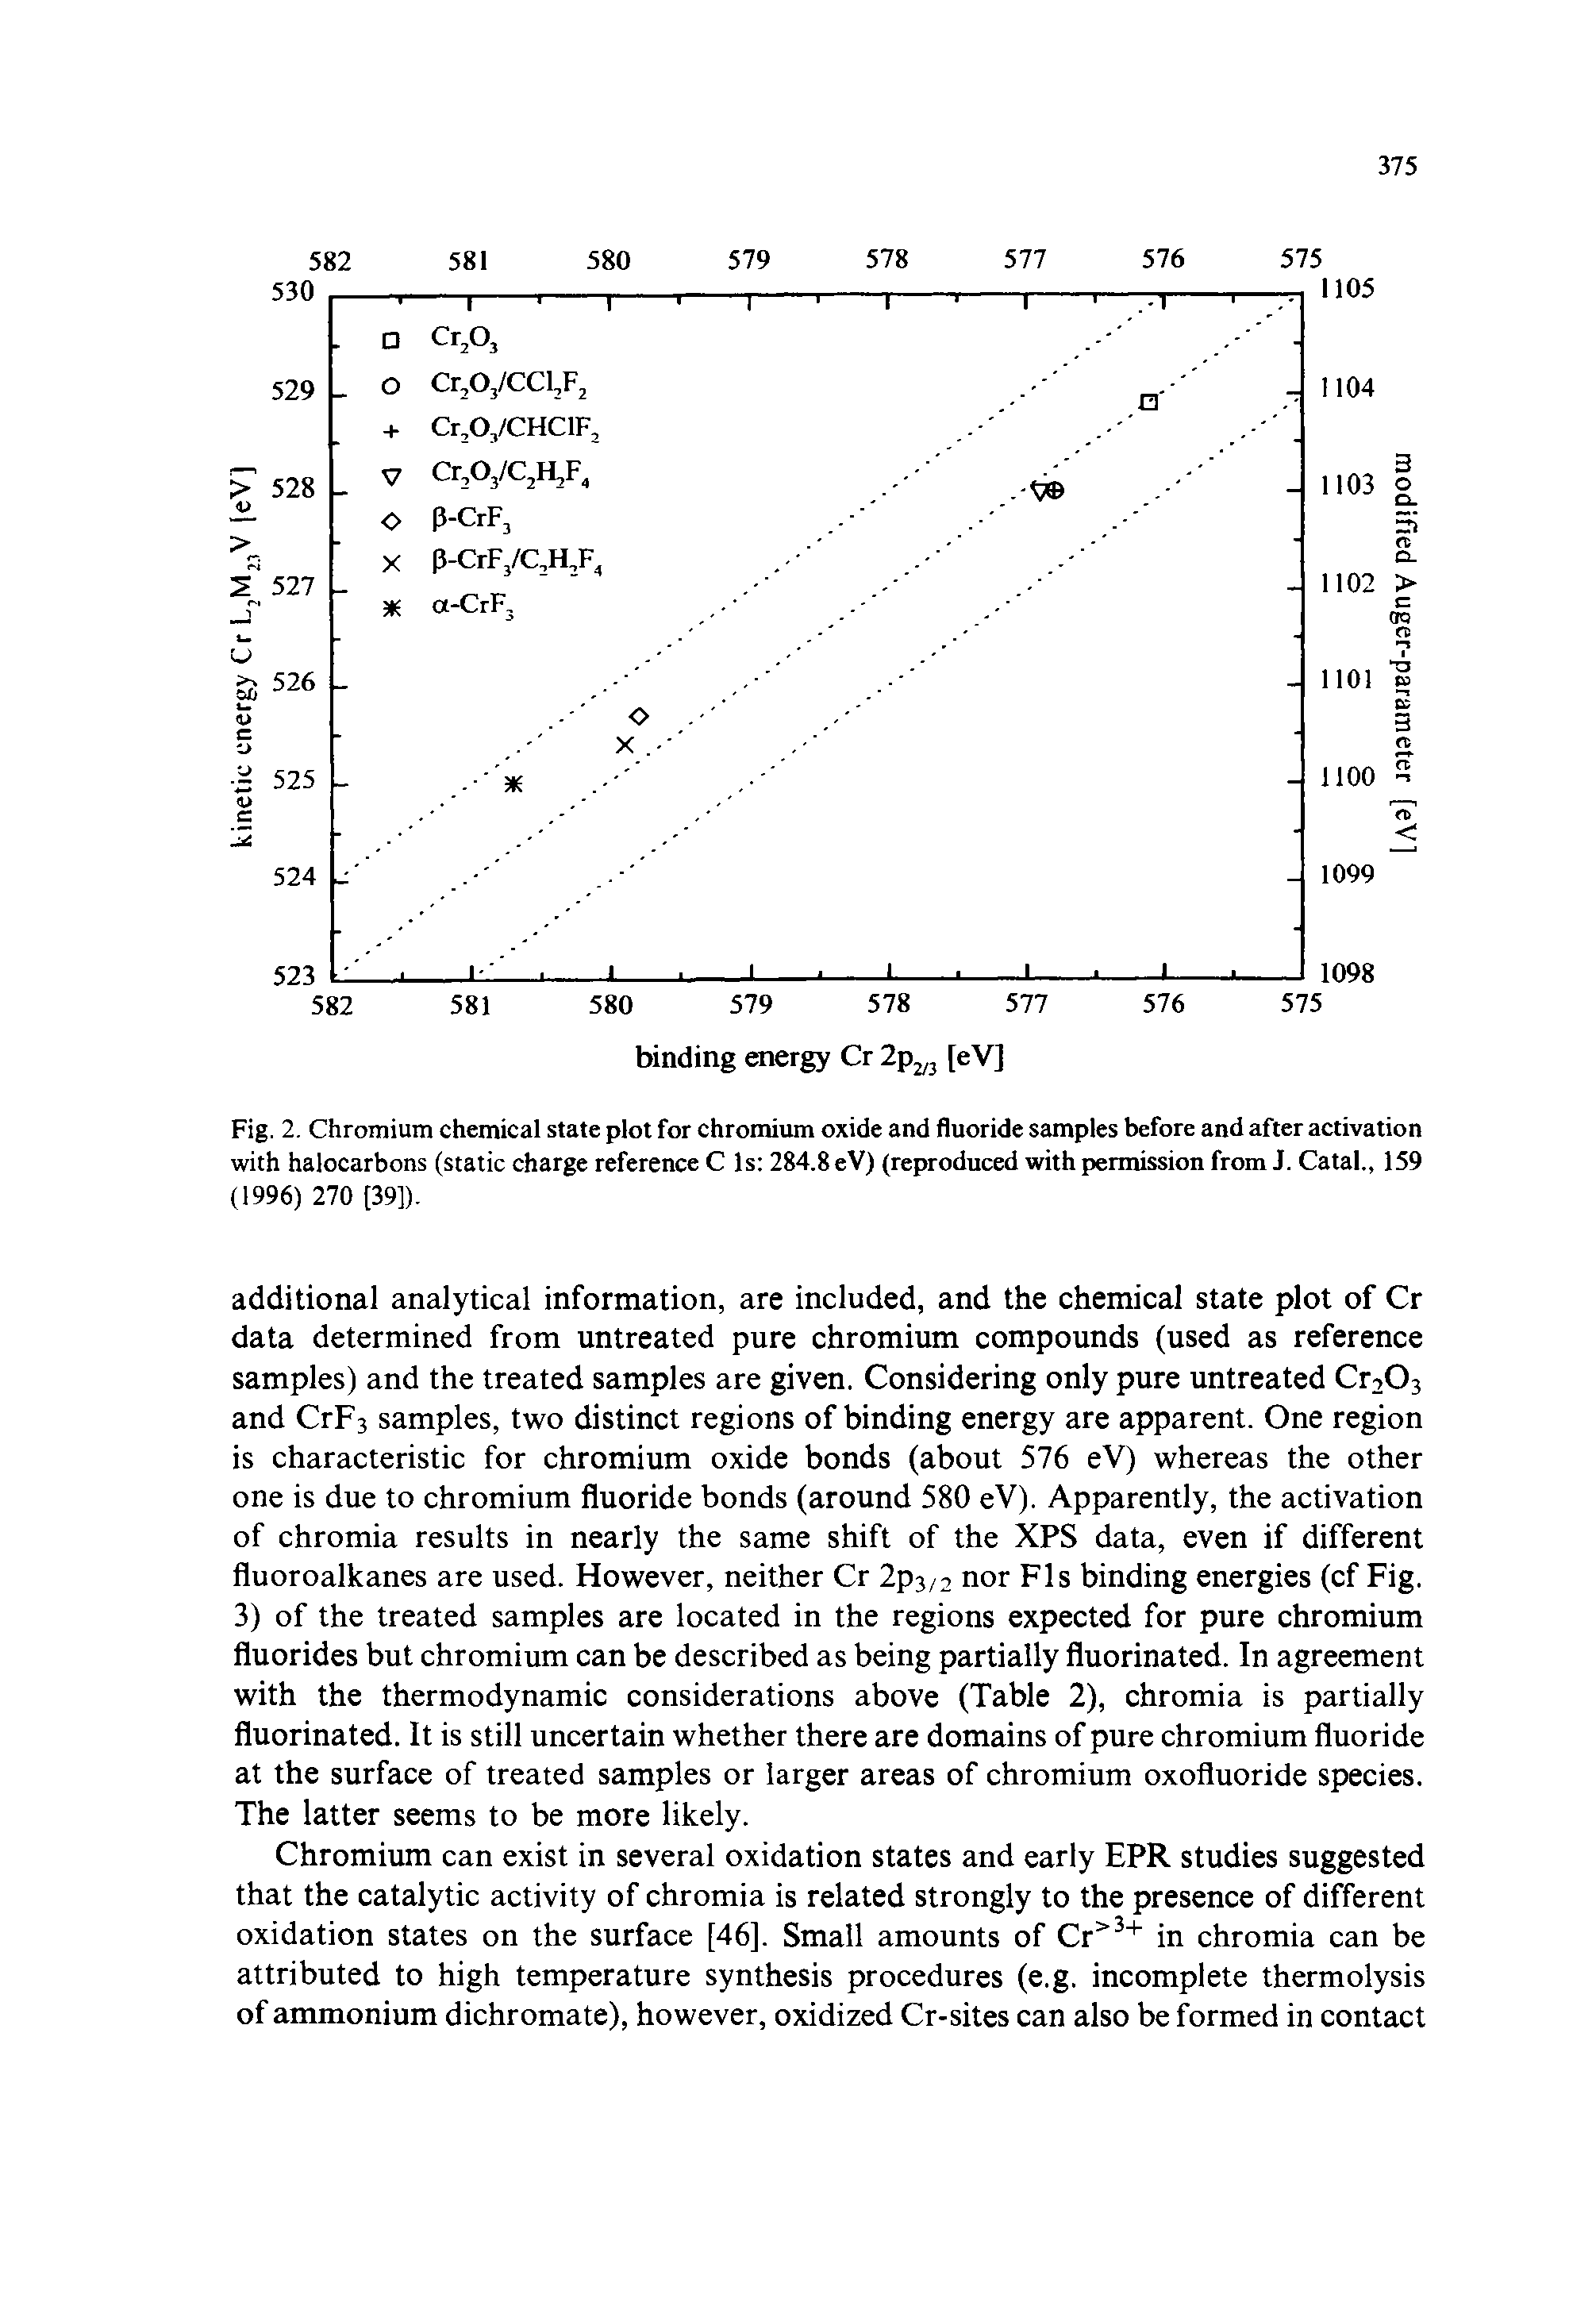 Fig. 2. Chromium chemical state plot for chromium oxide and fluoride samples before and after activation with halocarbons (static charge reference C Is 284.8 eV) (reproduced with permission from J. Catal., 159 (1996) 270 (39]).